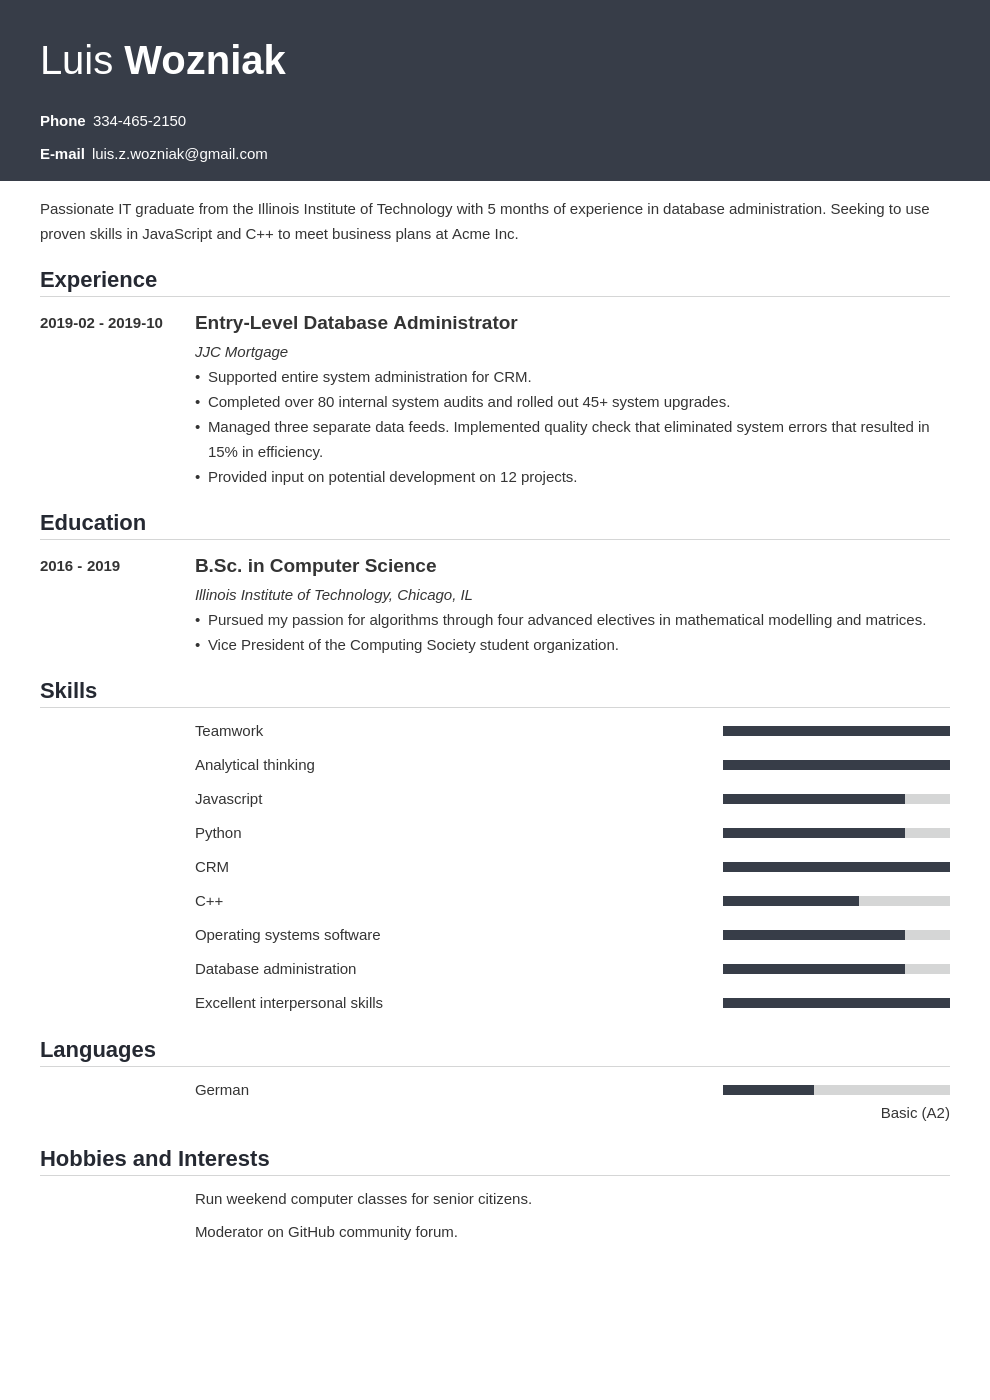 entry level tech resume examples